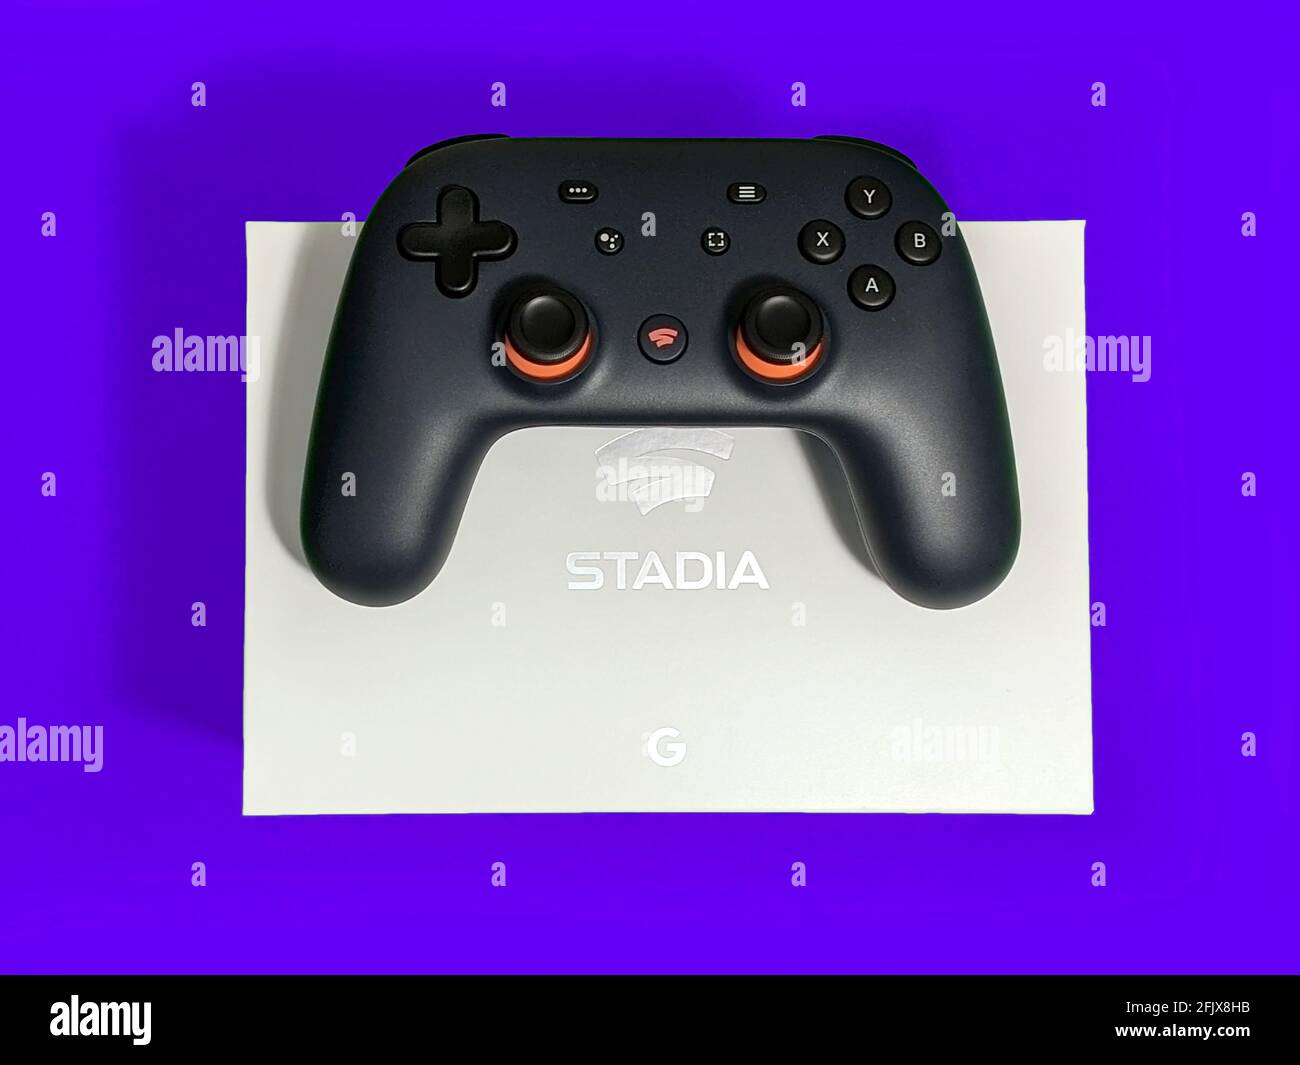 Seattle, WA / USA - circa November 2019: Closeup of a Google Stadia gaming controller resting on top of a white box against a colorful background Stock Photo